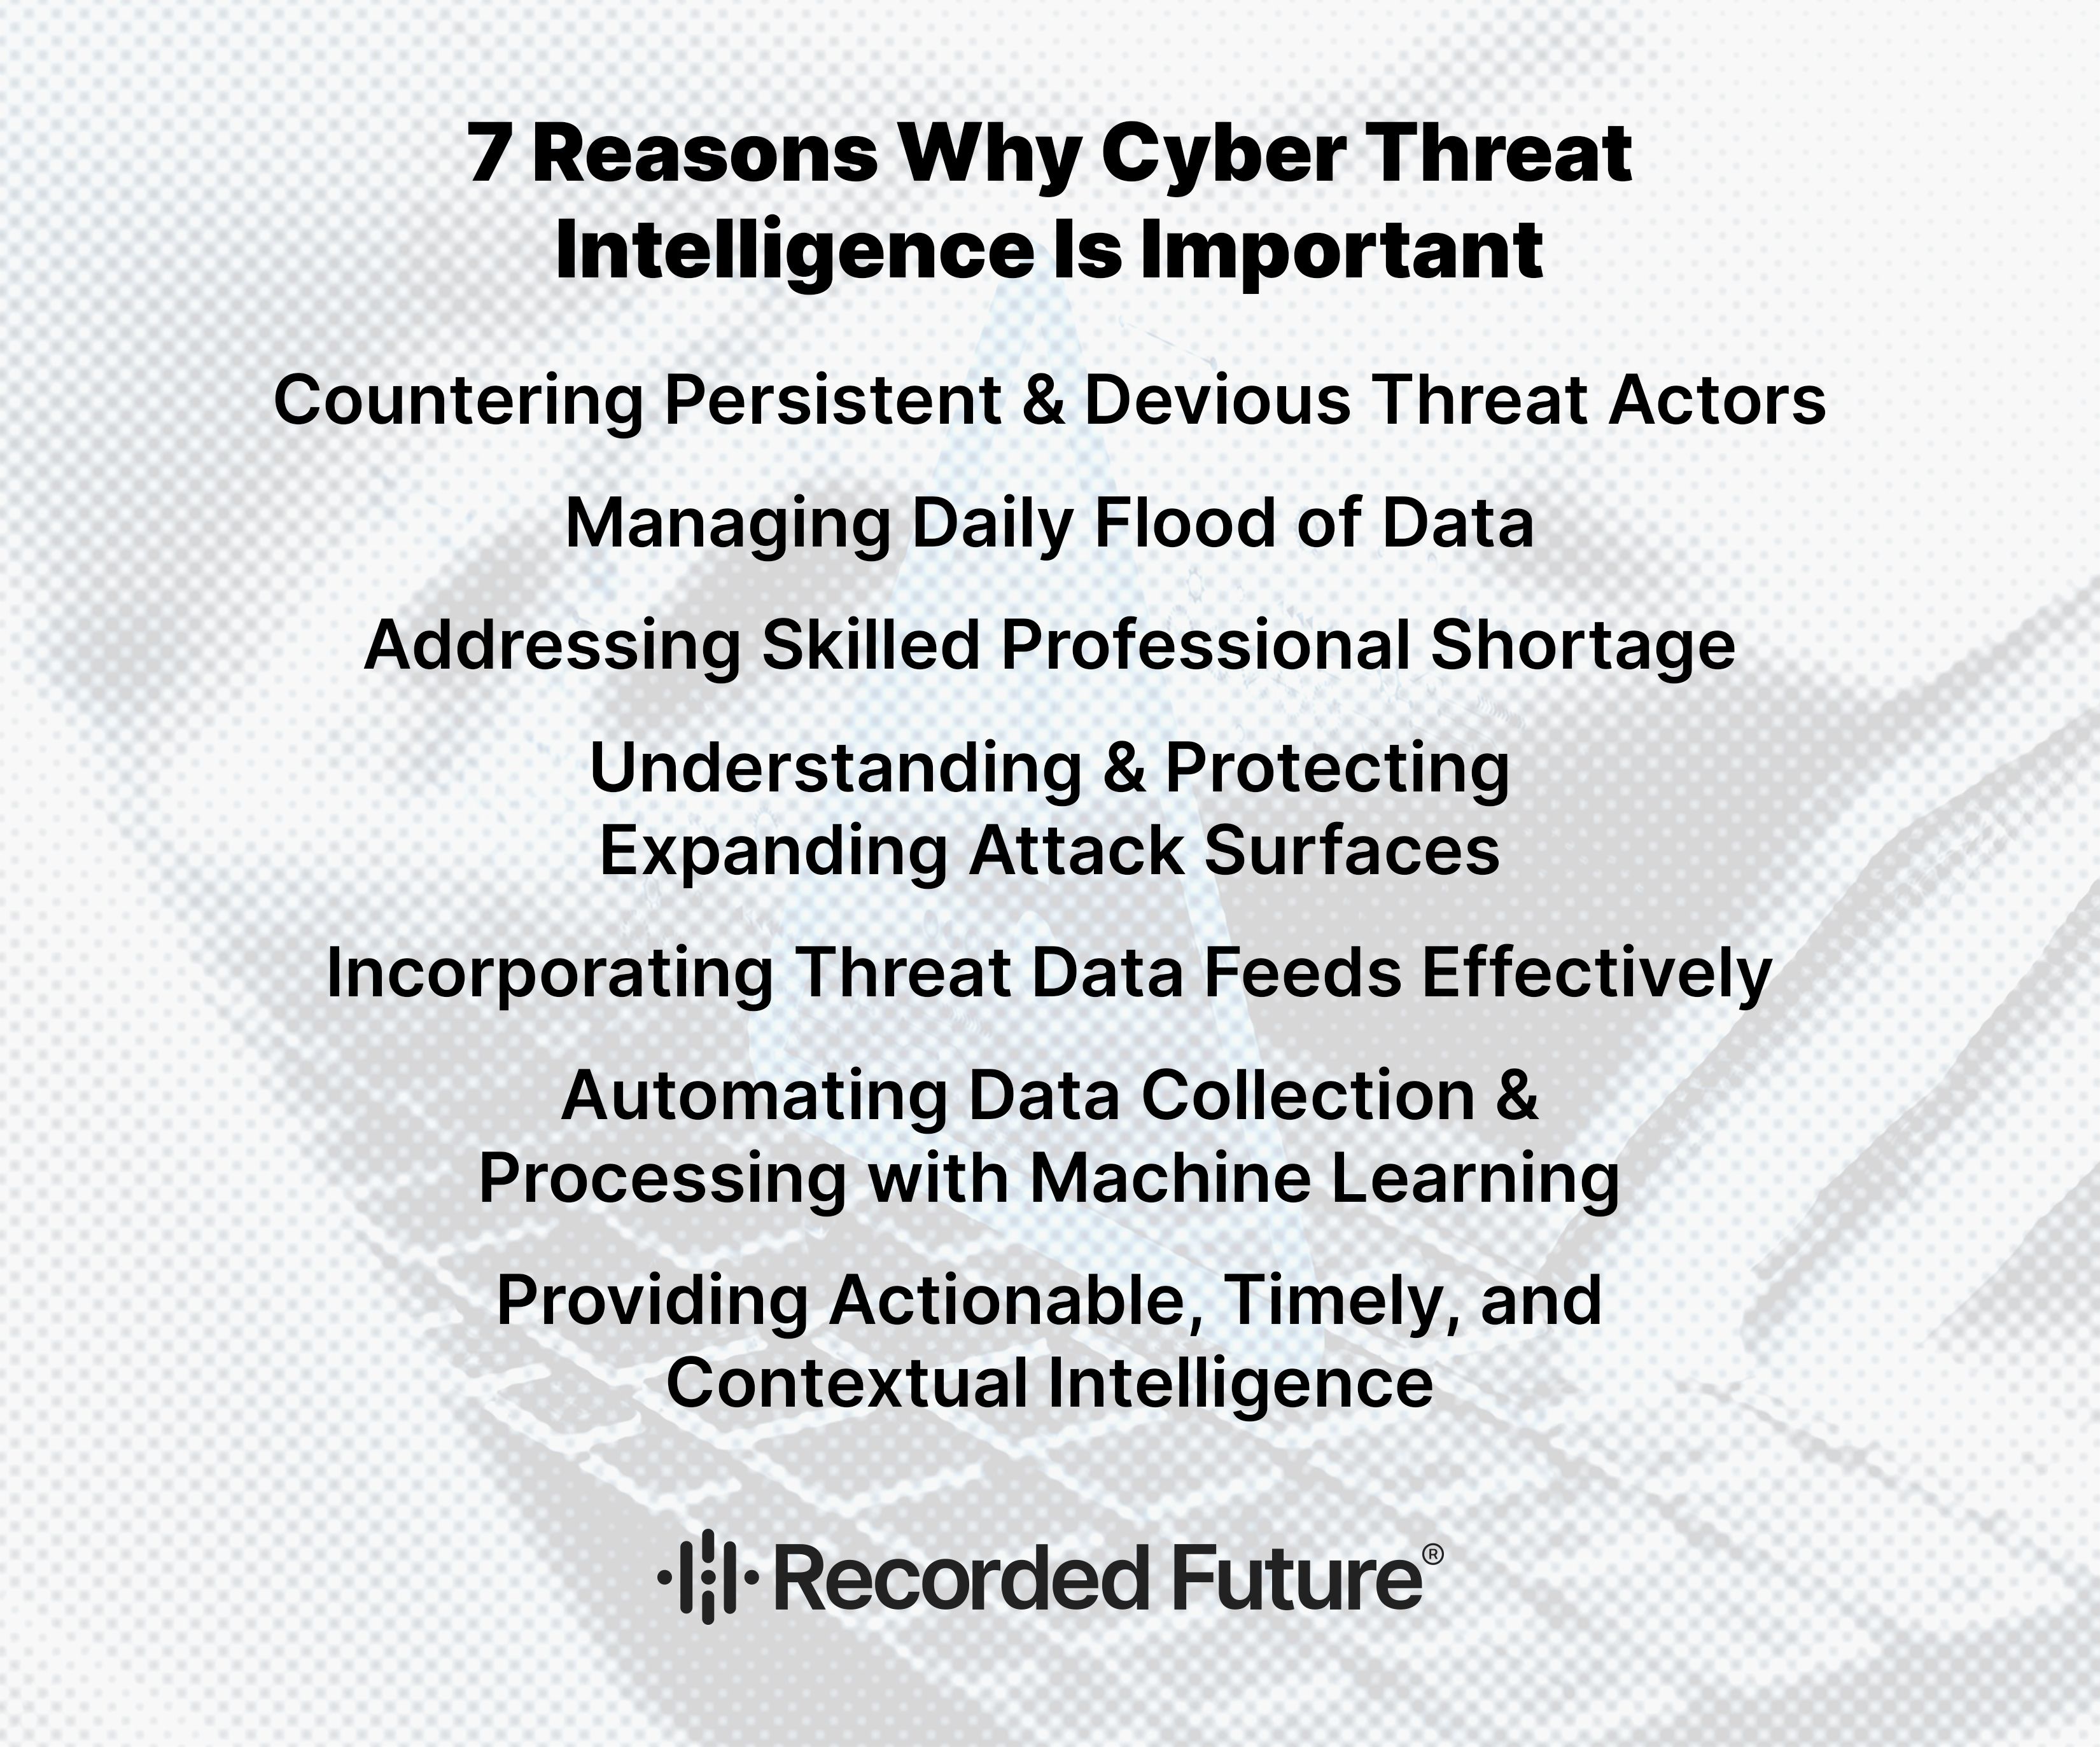 Why is Cyber Threat Intelligence Important?